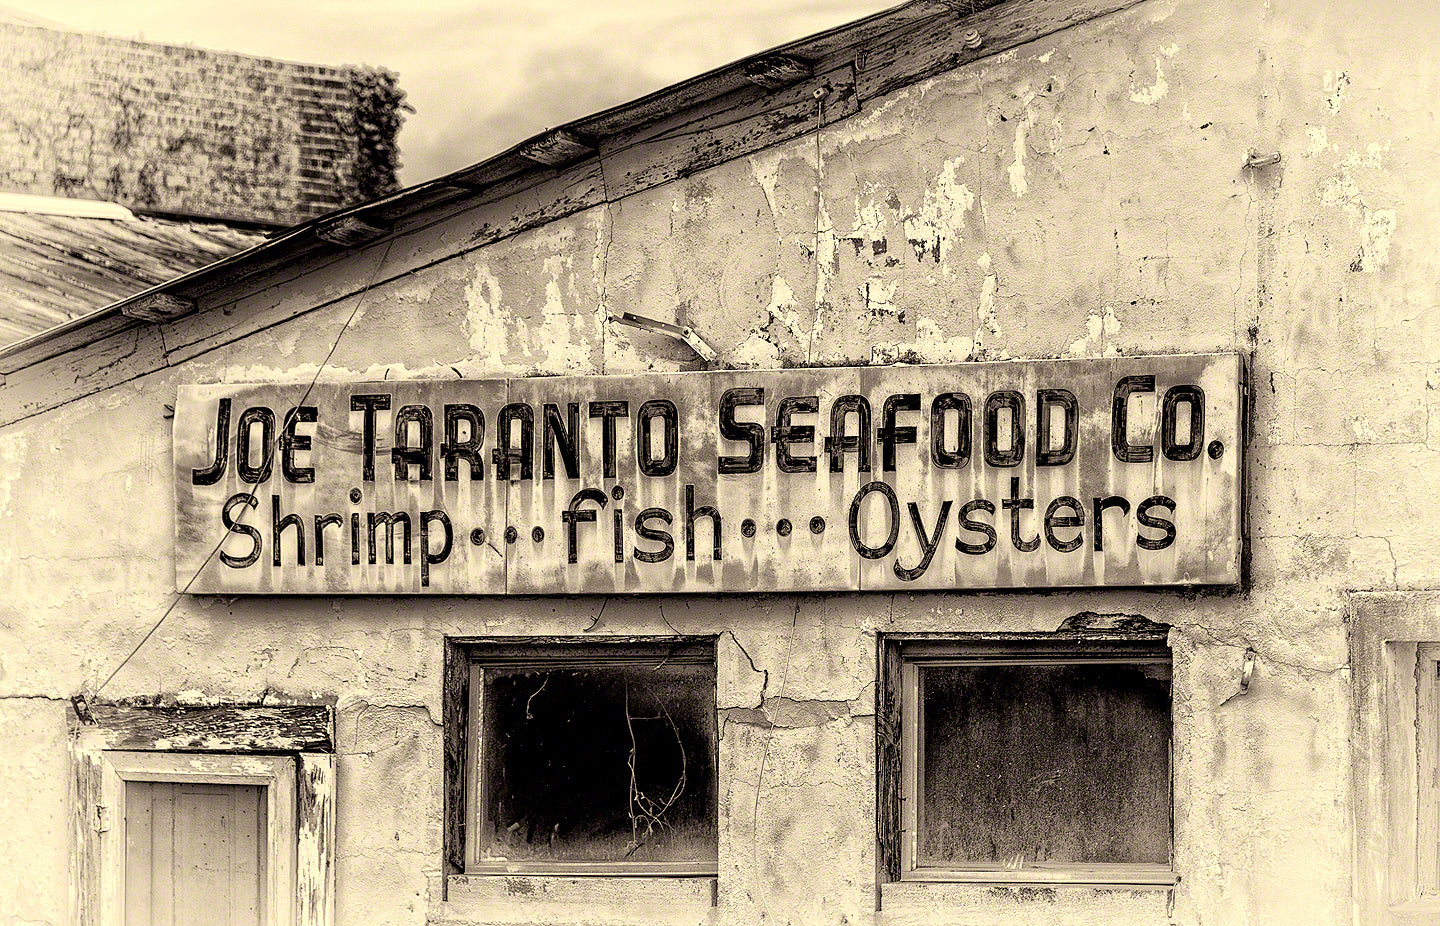 A Landscape Fine Art Photograph by Mike Ring of an old rustic seafood house.